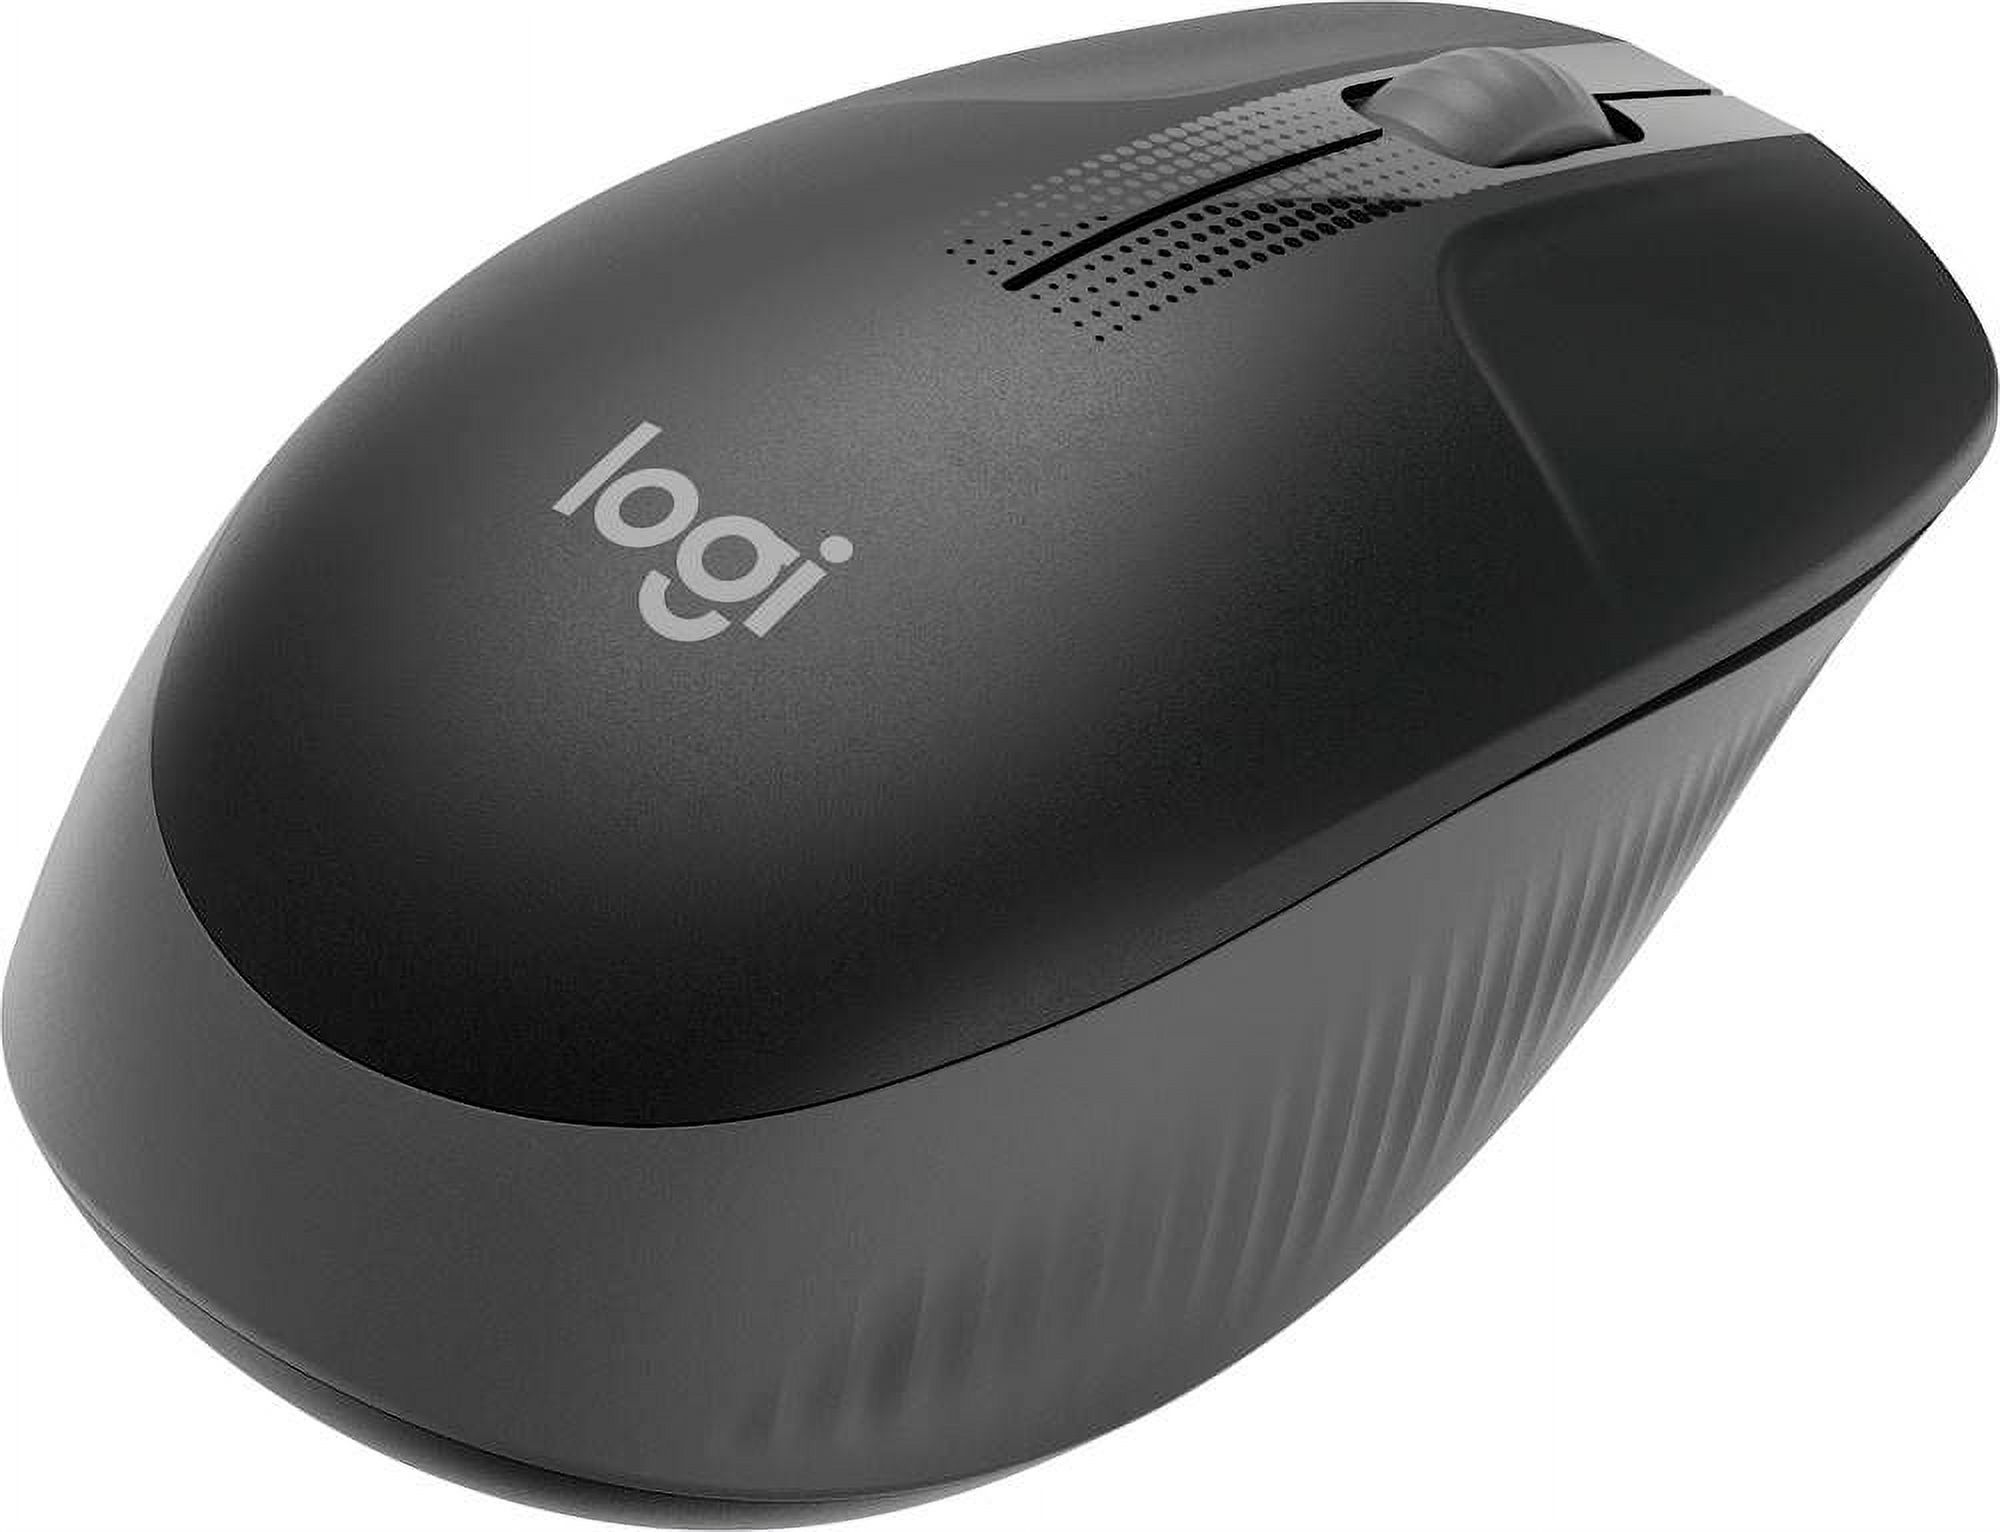 Logitech M190 Full-Sized Wireless Mouse, Charcoal - image 4 of 4